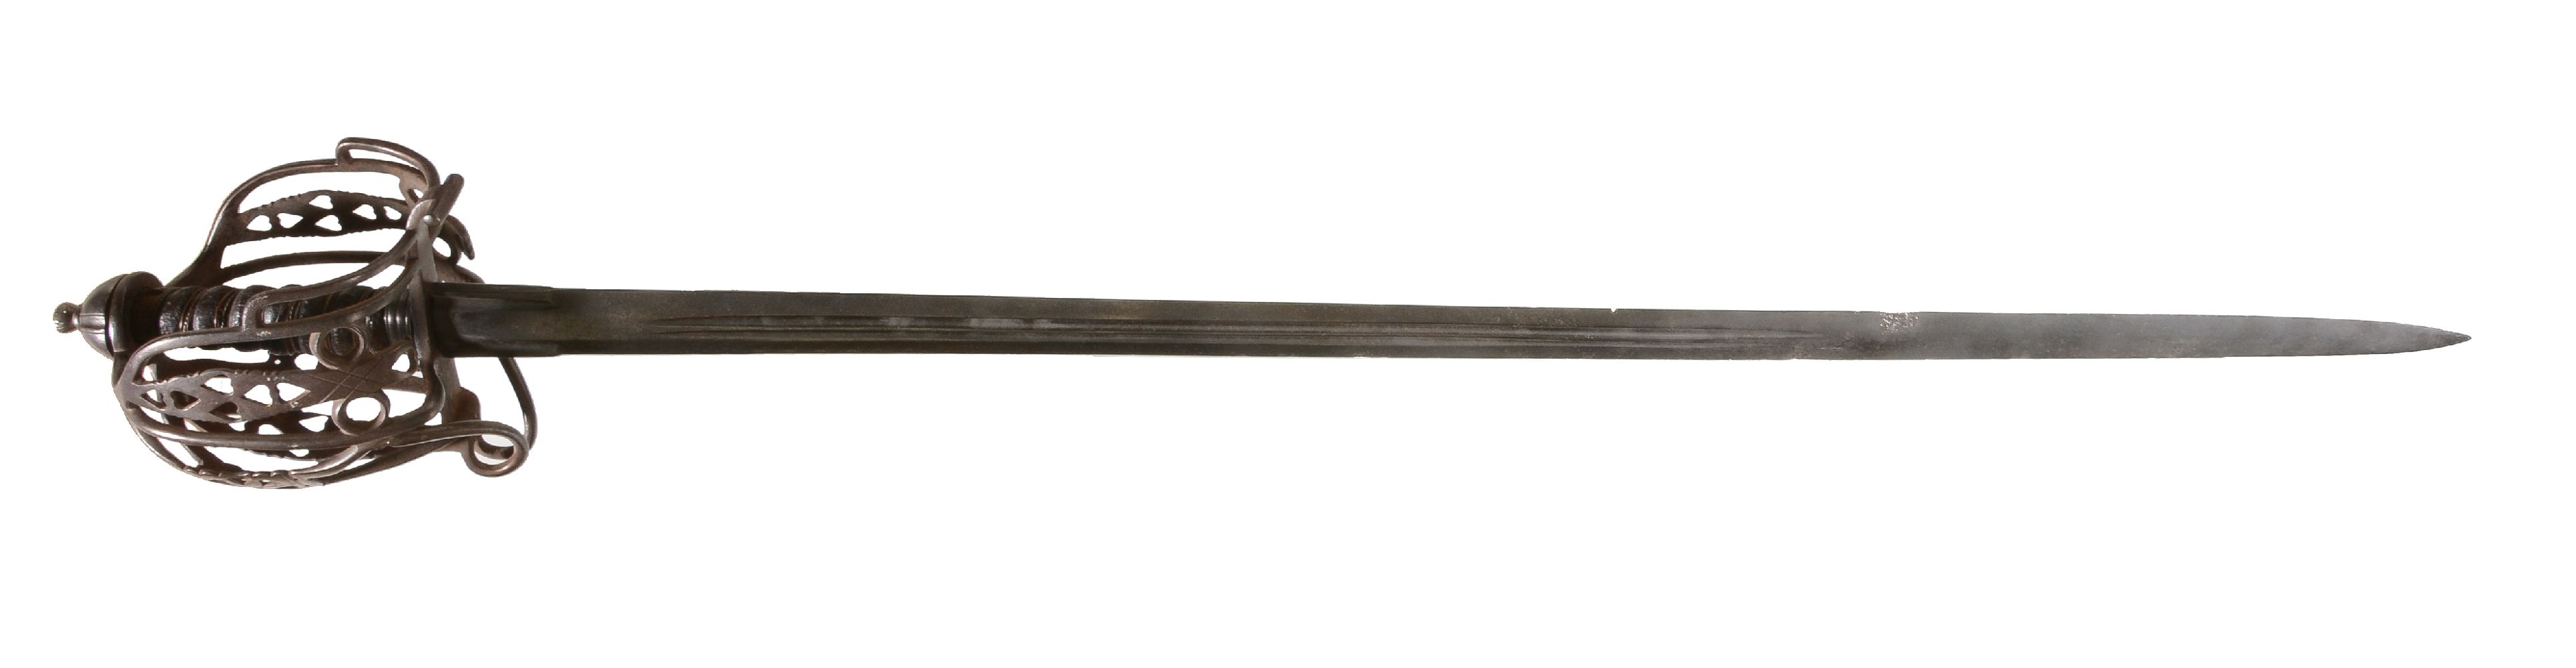 A Scottish basket-hilt broadsword, 19th century, with 32 inch 'proved' blade, 96cm long overall